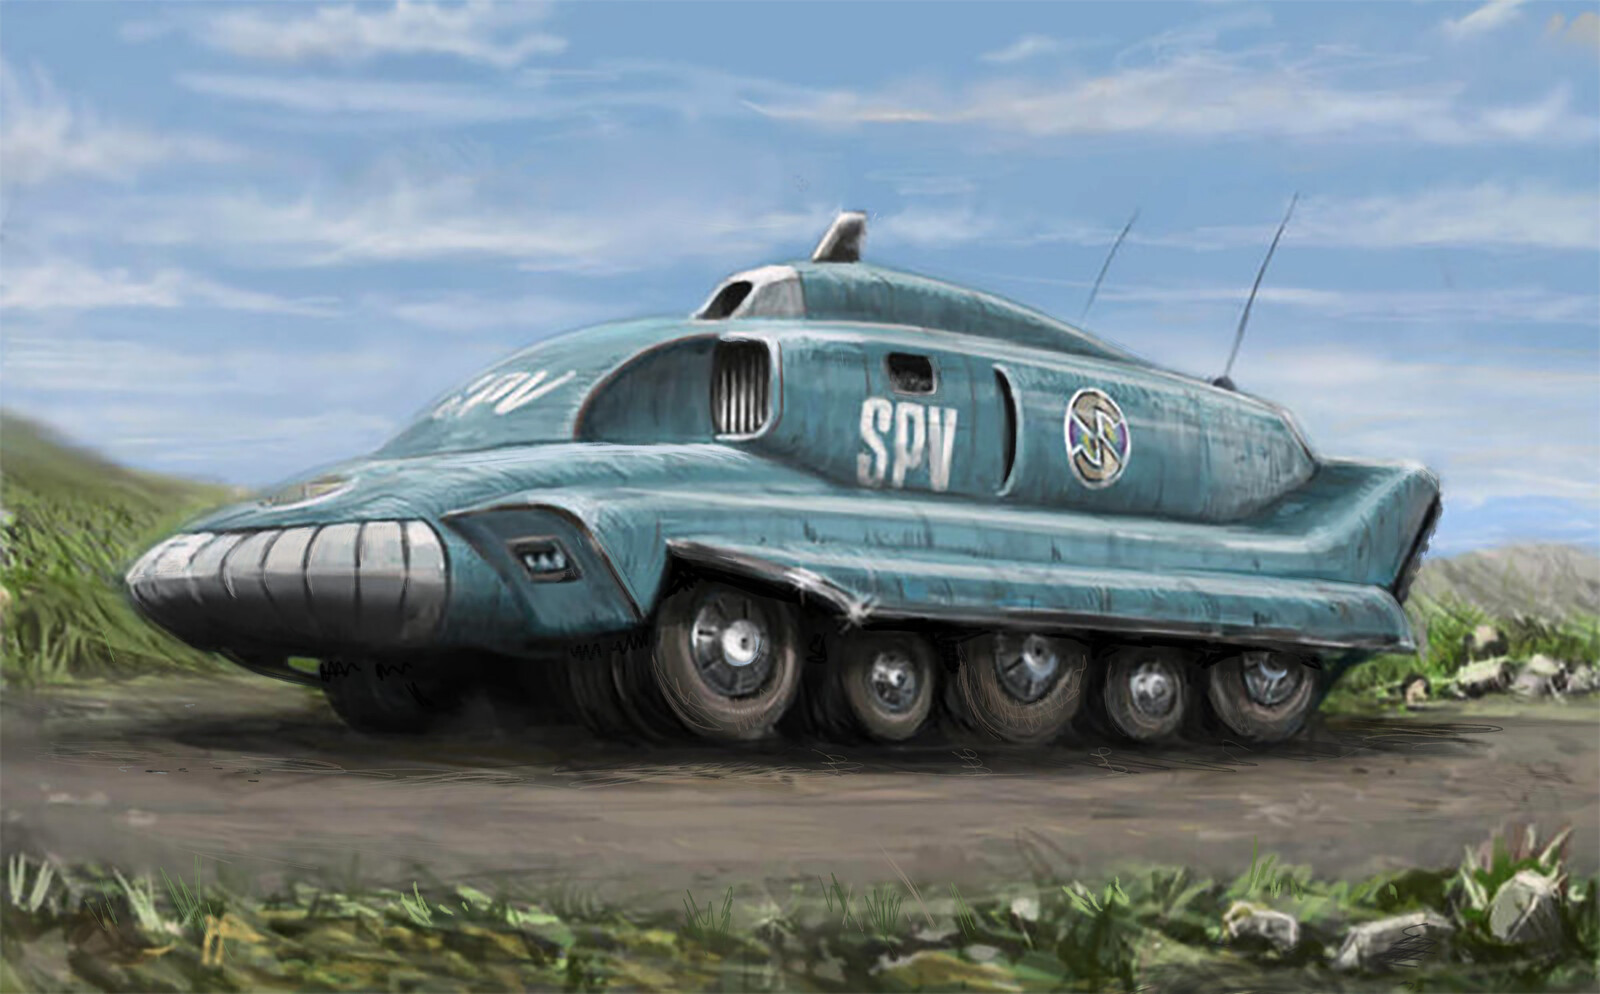 SPV
From 'Captain Scarlet and the Mysterons'. The principal vehicle used by Spectrum agents in their fight against the Mysterons. The Spectrum Pursuit Vehicle was designed by Derek Meddings